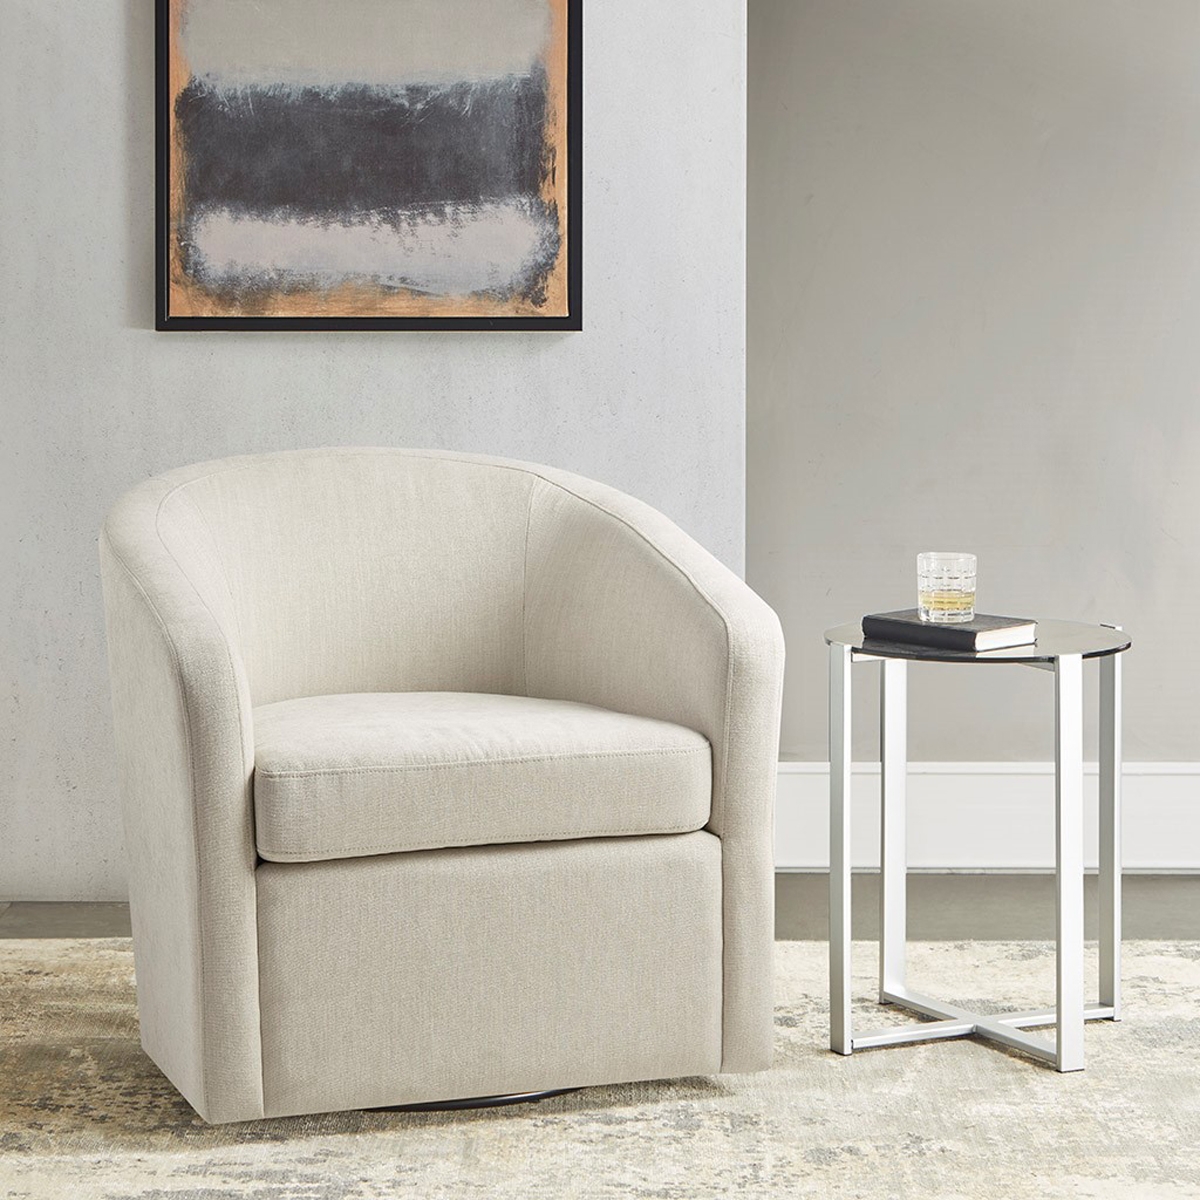 Picture of HEARD SWIVEL CHAIR IN IVORY